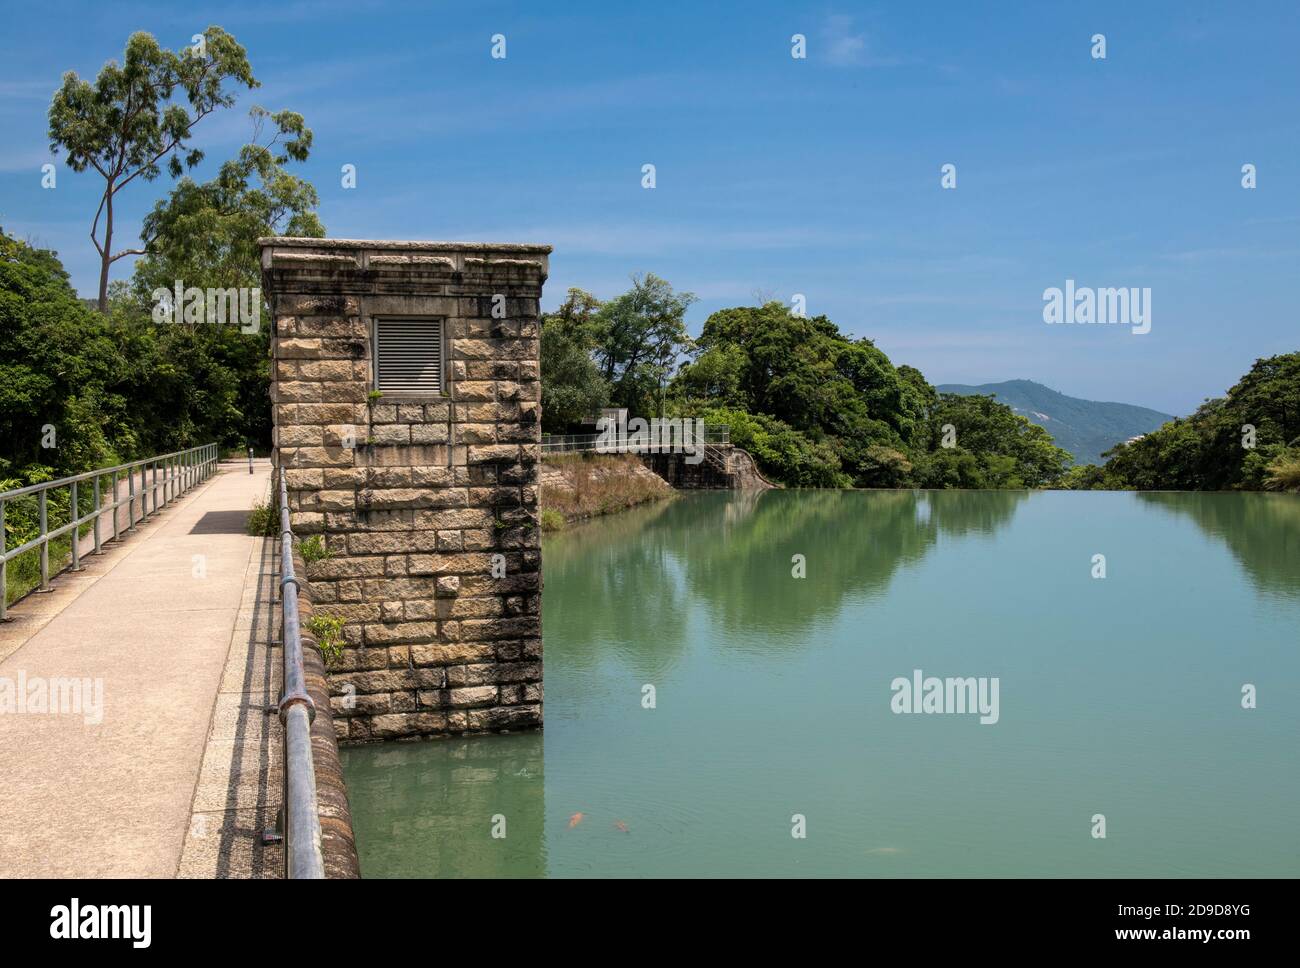 Hong Kong,China:23 Aug,2020.  Tai Tam Upper Reservoir bridge and valve house on the dam.Hiking in Hong Kong is a very popular pastime fueled more by w Stock Photo